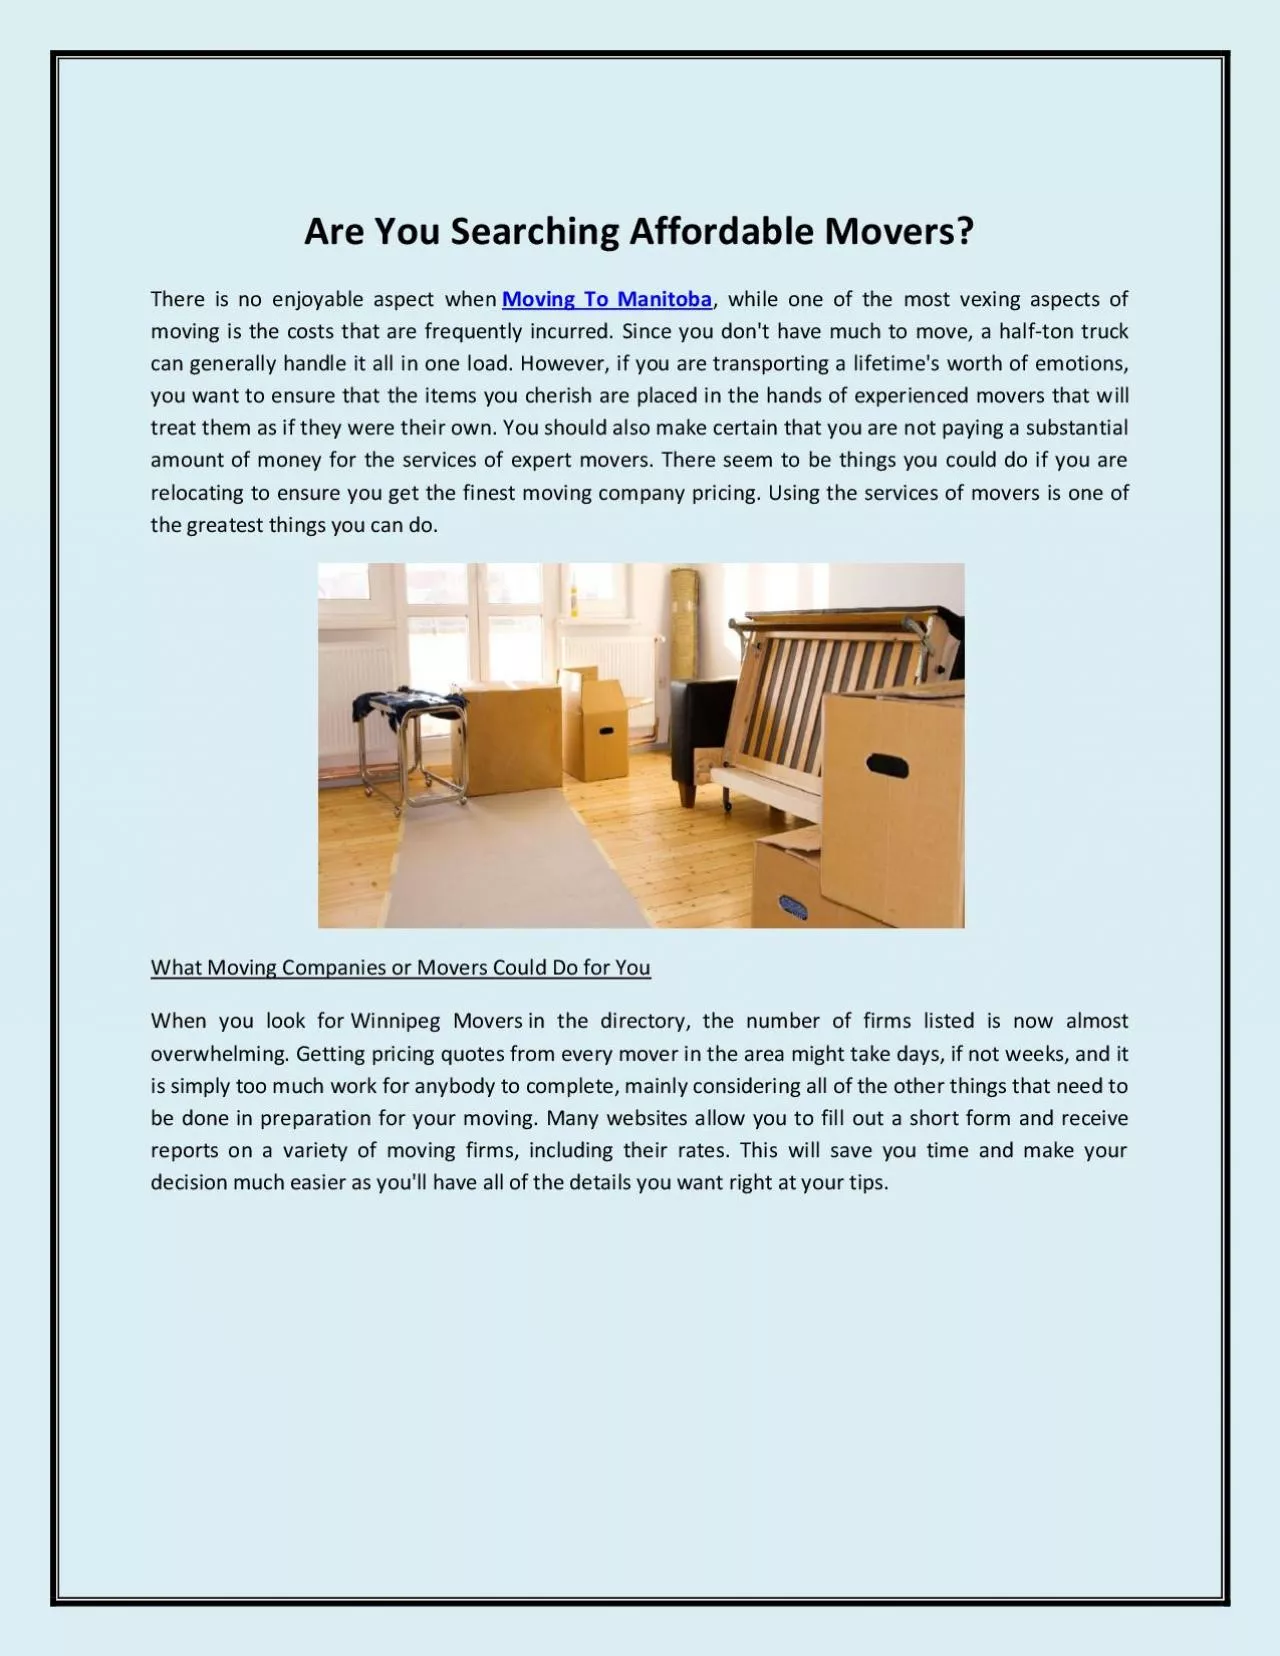 Are You Searching Affordable Movers?